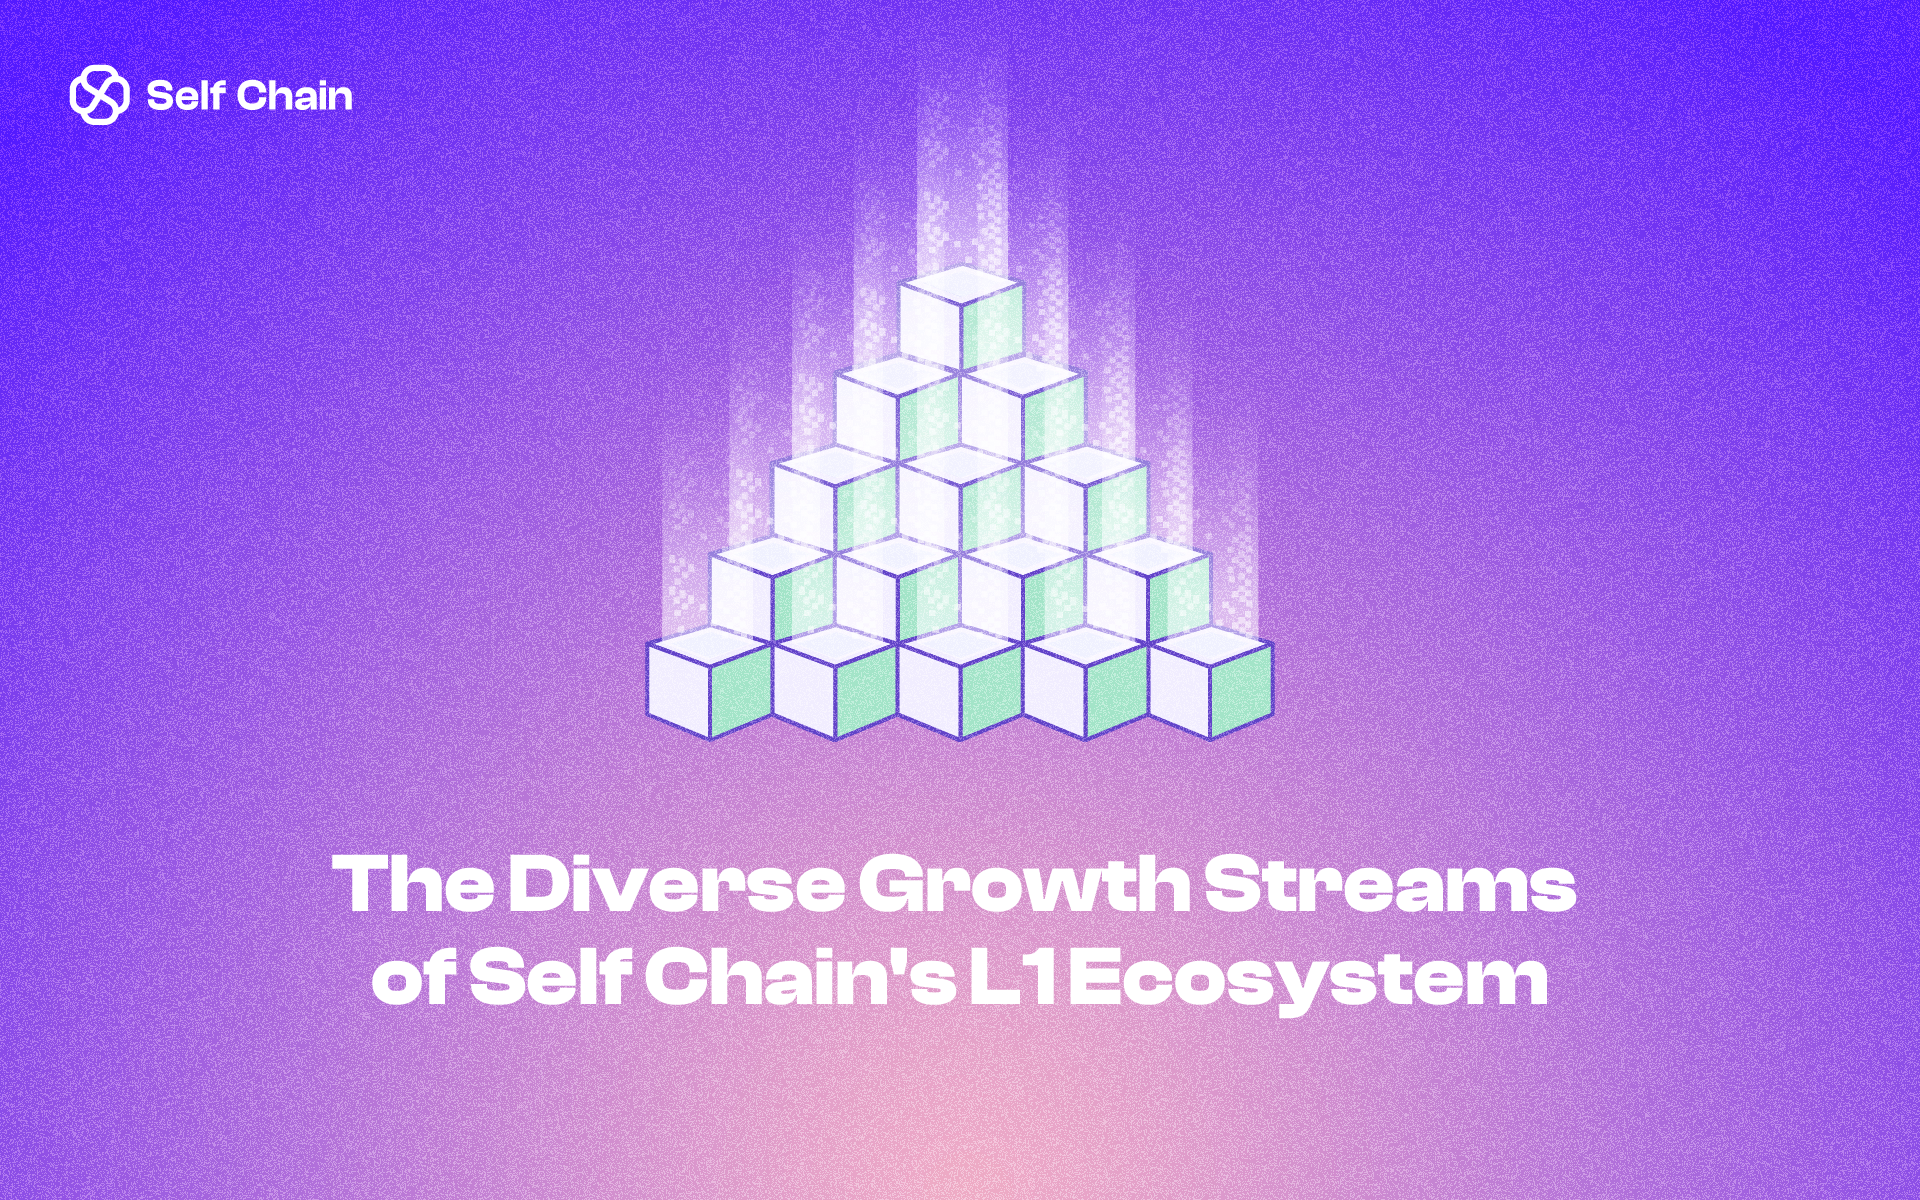 The Diverse Growth Streams of Self Chain's L1 Ecosystem